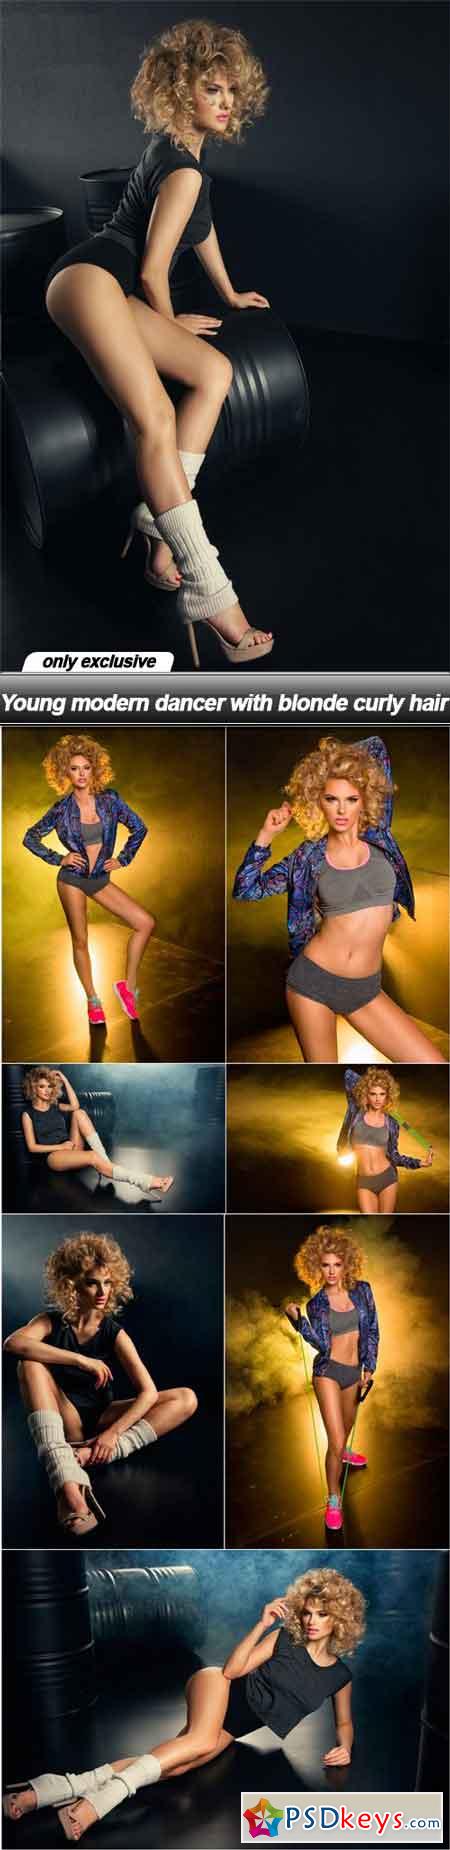 Young modern dancer with blonde curly hair - 8 UHQ JPEG